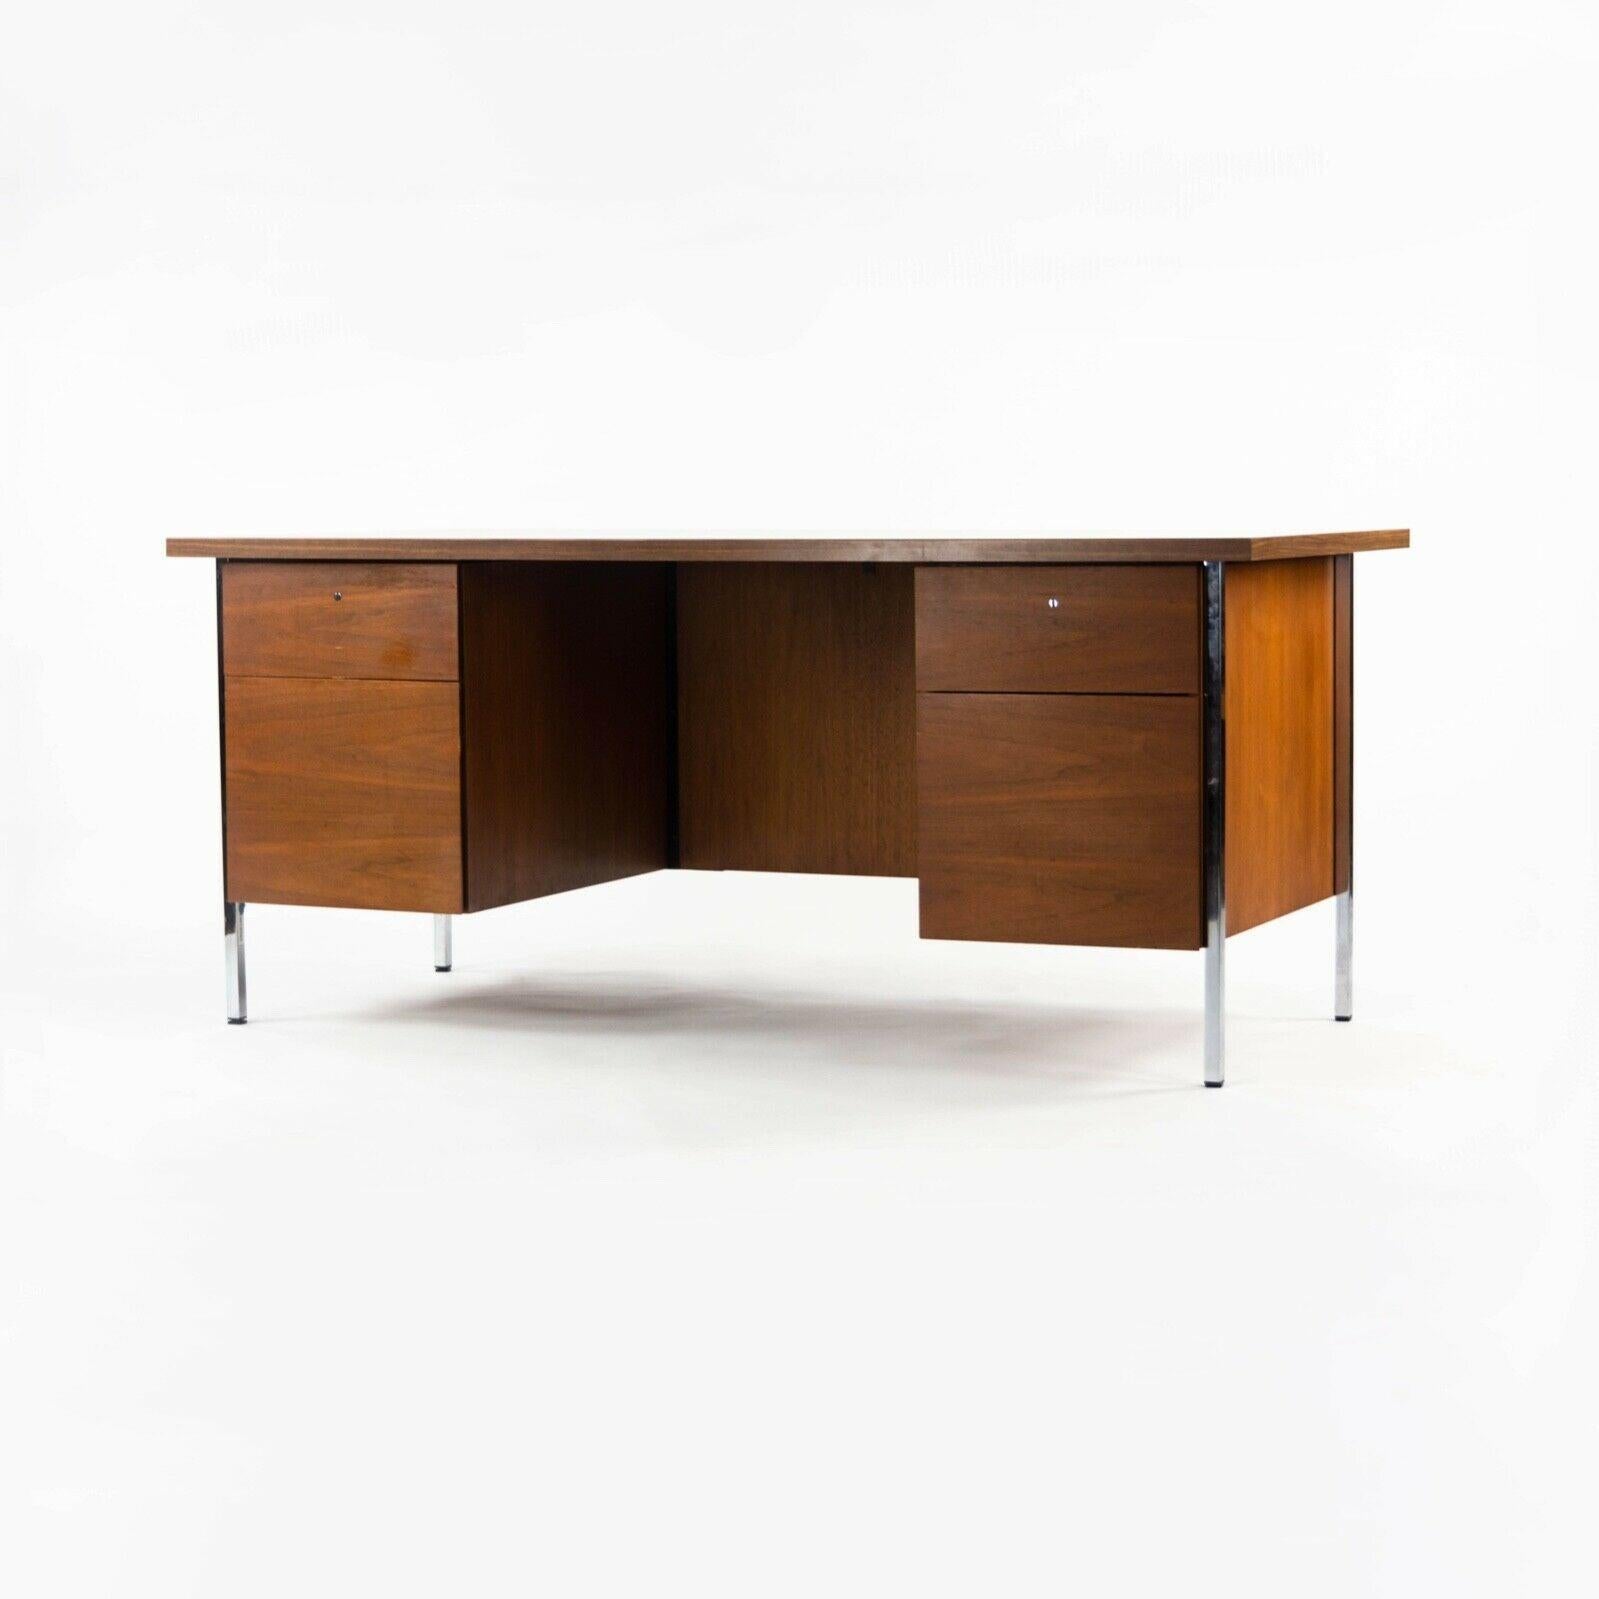 Listed for sale is a double pedestal desk, model 1503, designed by Florence Knoll and produced by Knoll Associates. This is an original example dating to circa late 1950s. It is constructed from walnut for the doors, sides, and back. The legs are